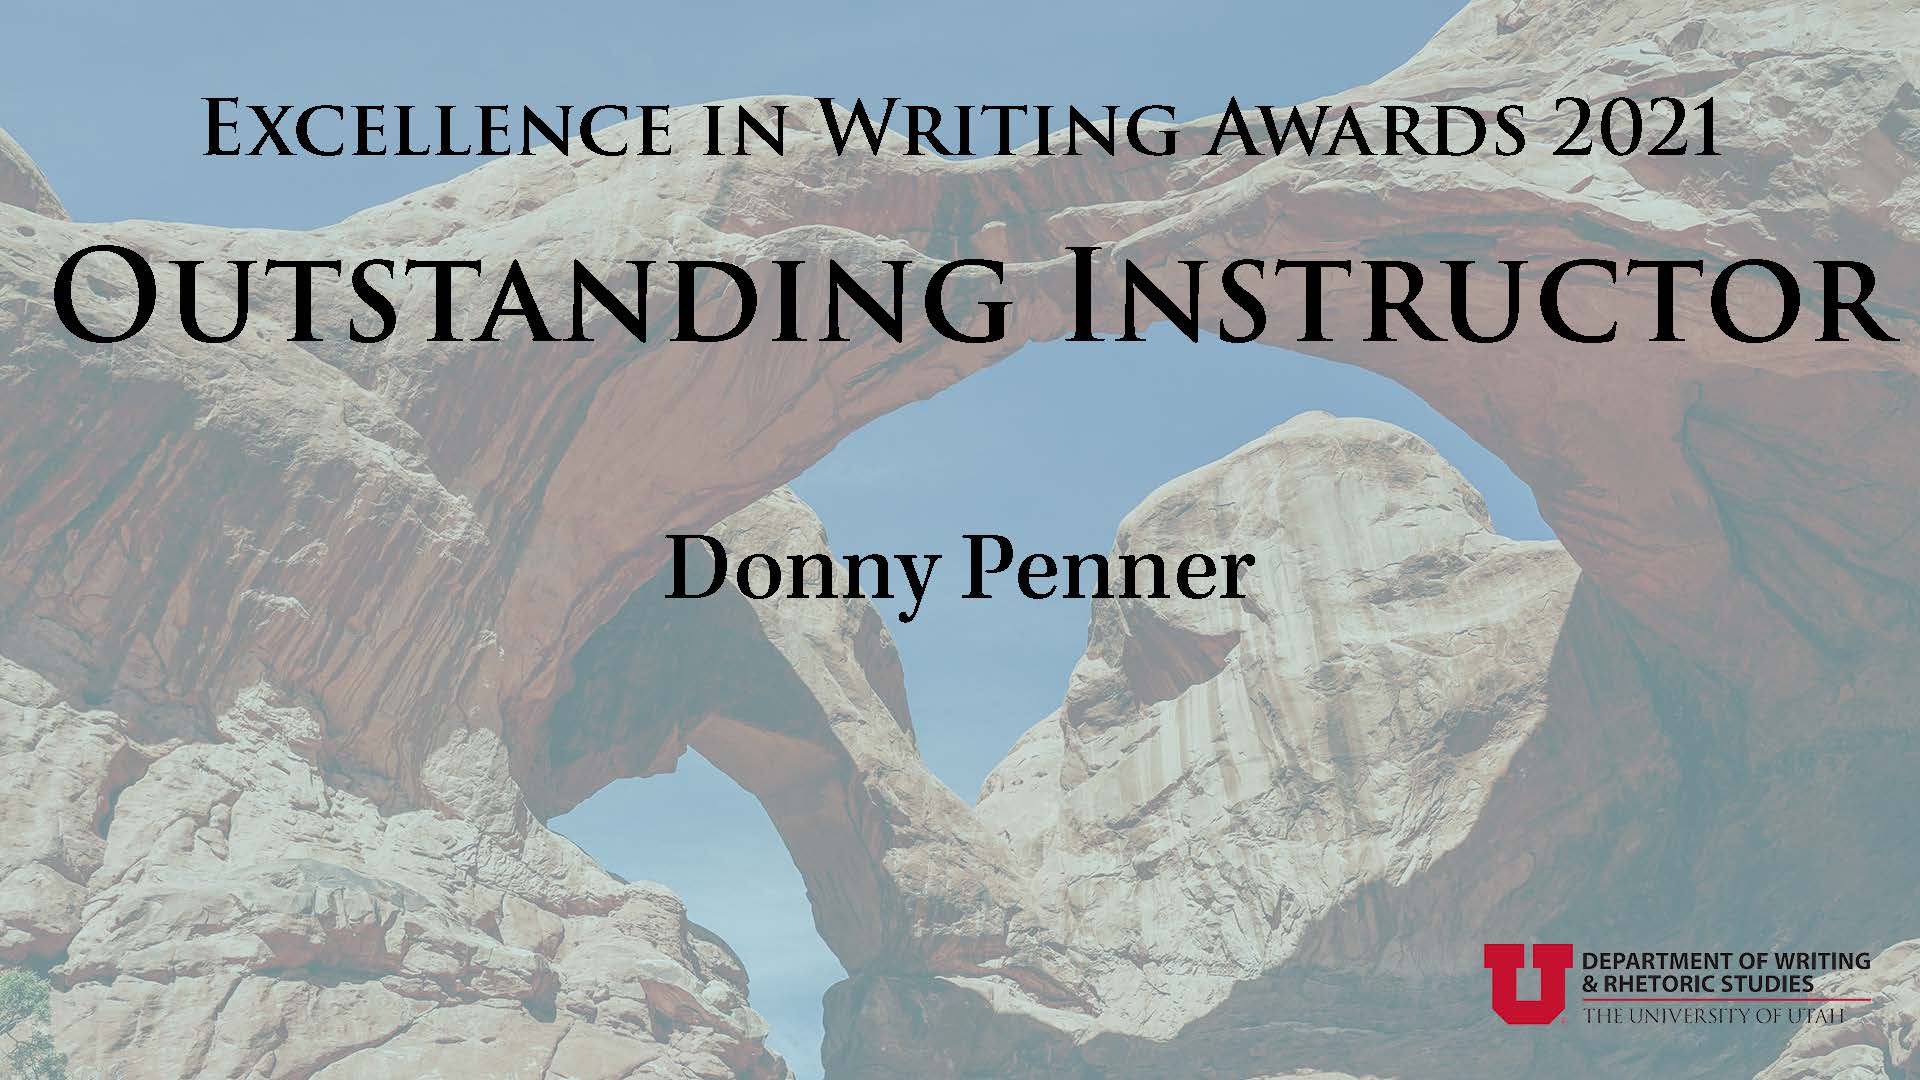 Outstanding Instructor — Donny Penner